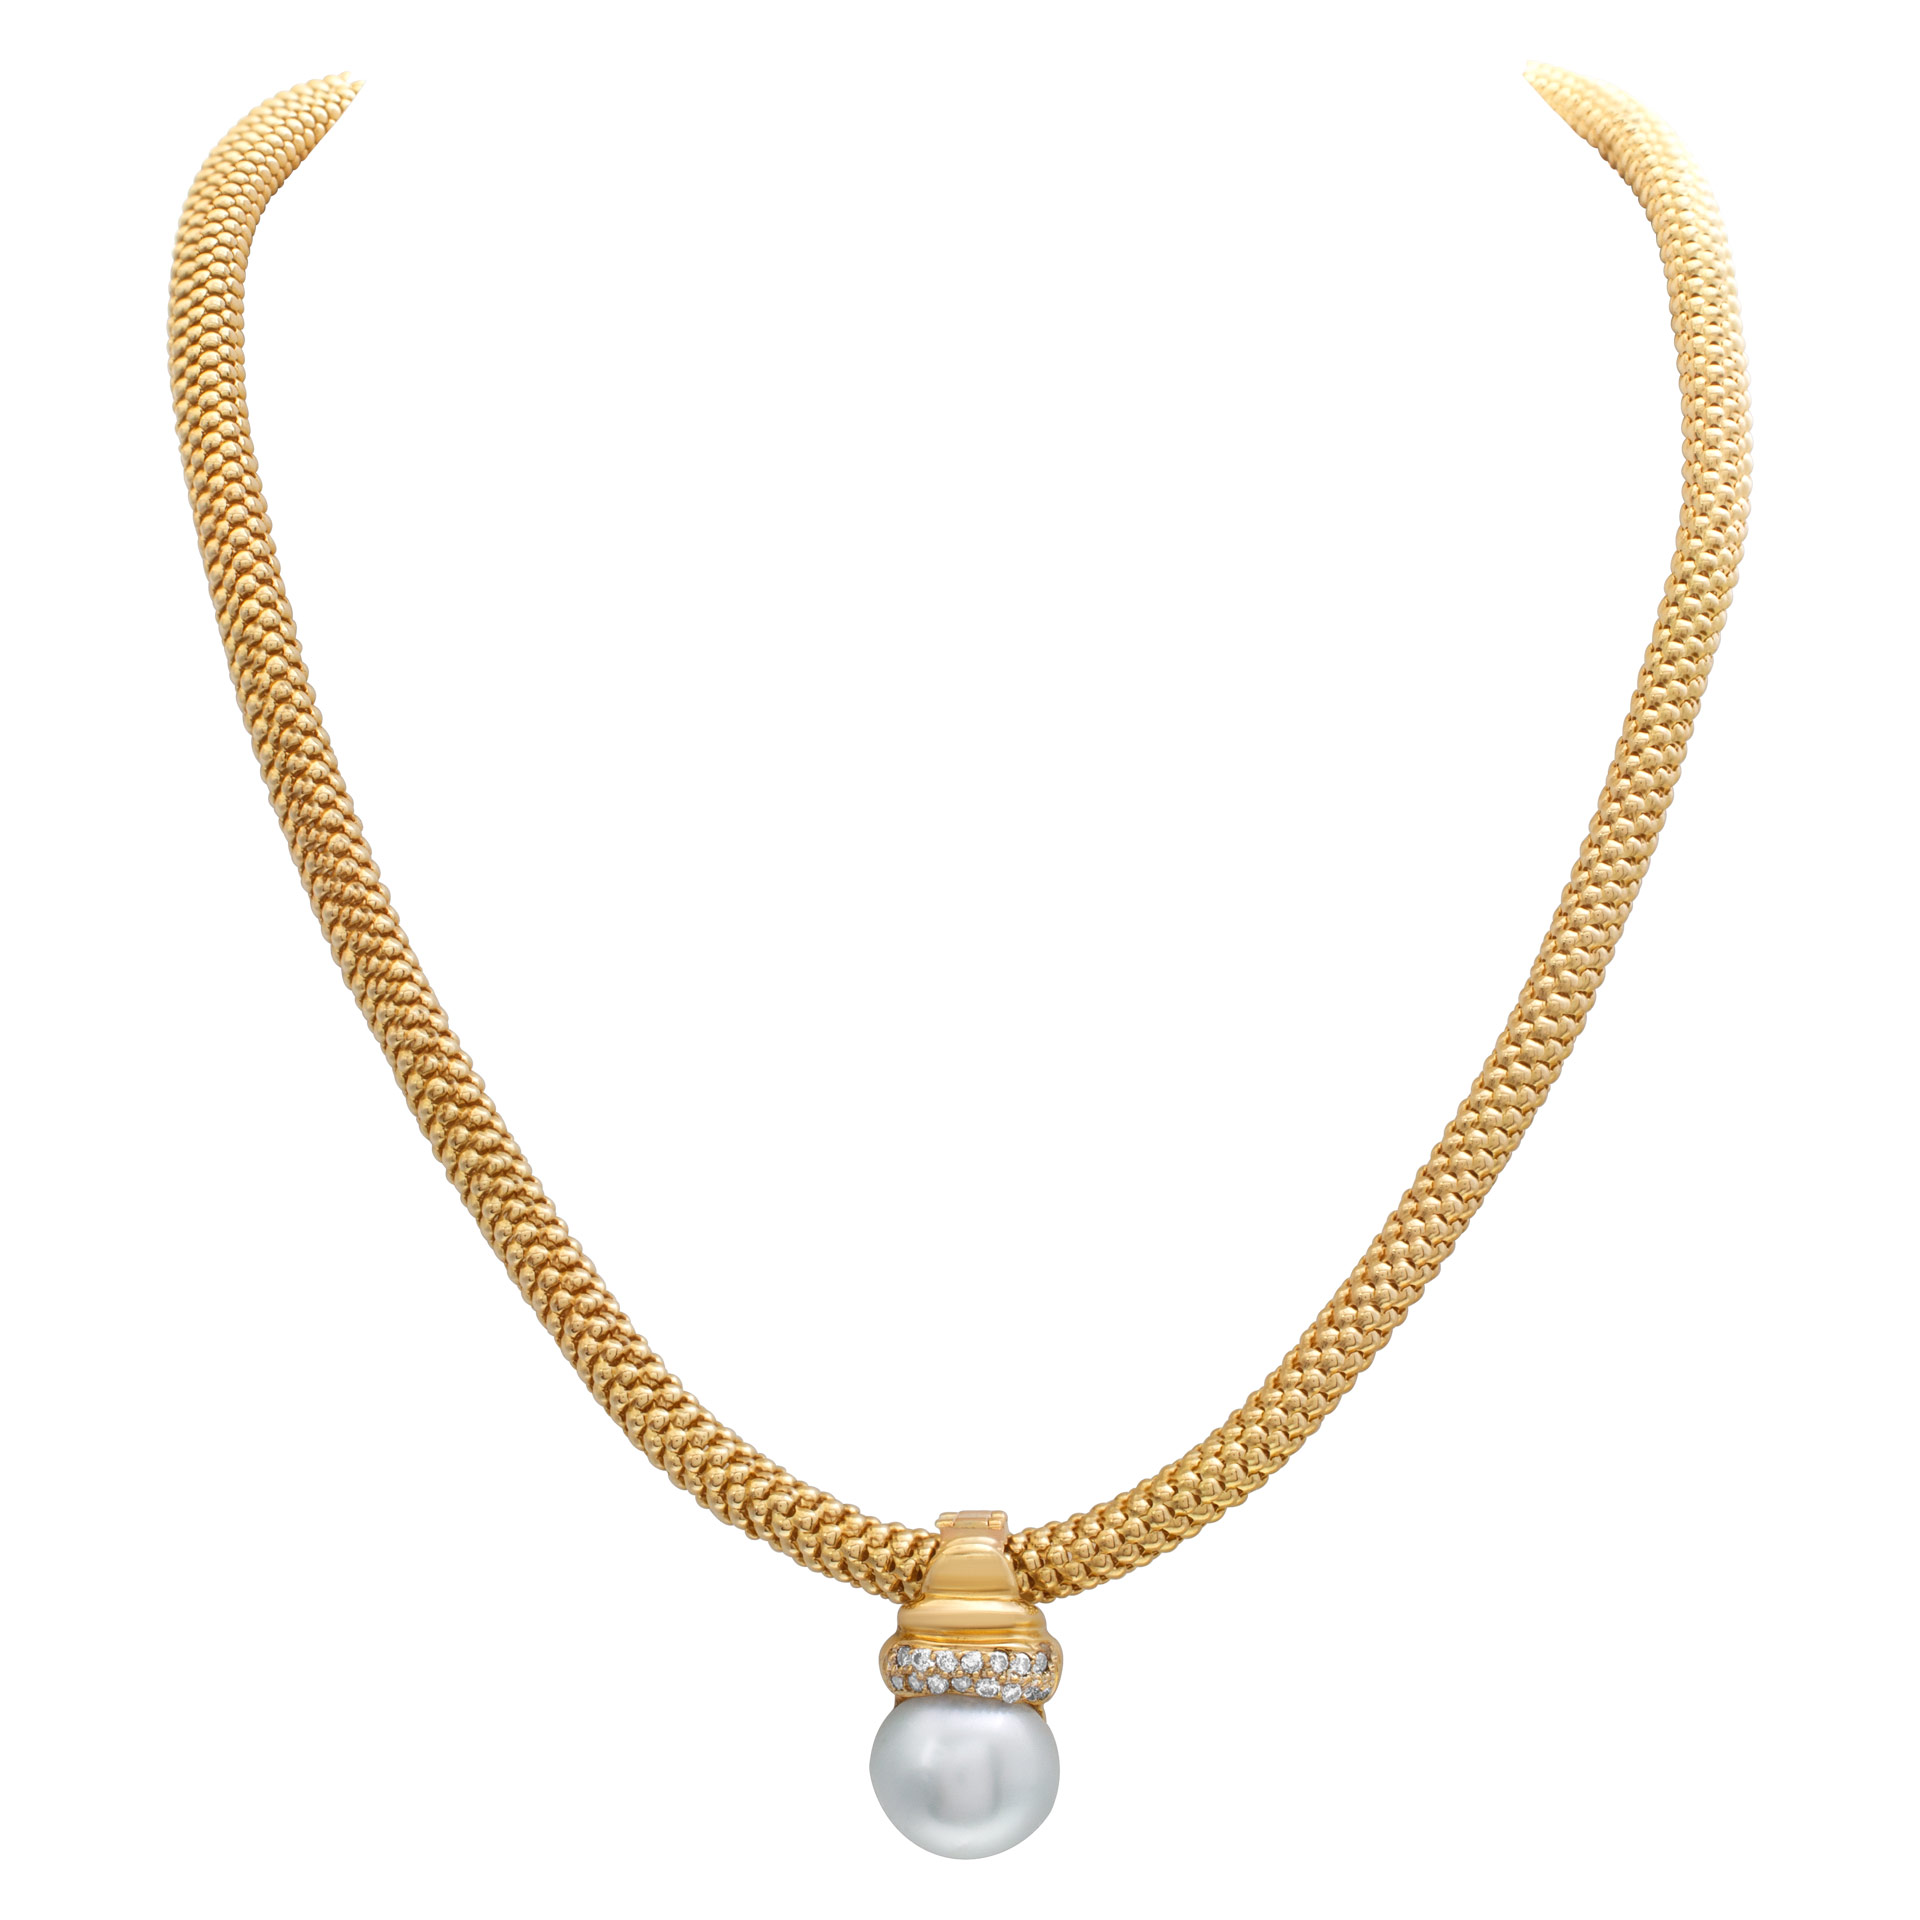 Italian designer "Bersani" necklace in 18k yellow gold with a removable South Sea Pearl & diamonds enhancer. image 1